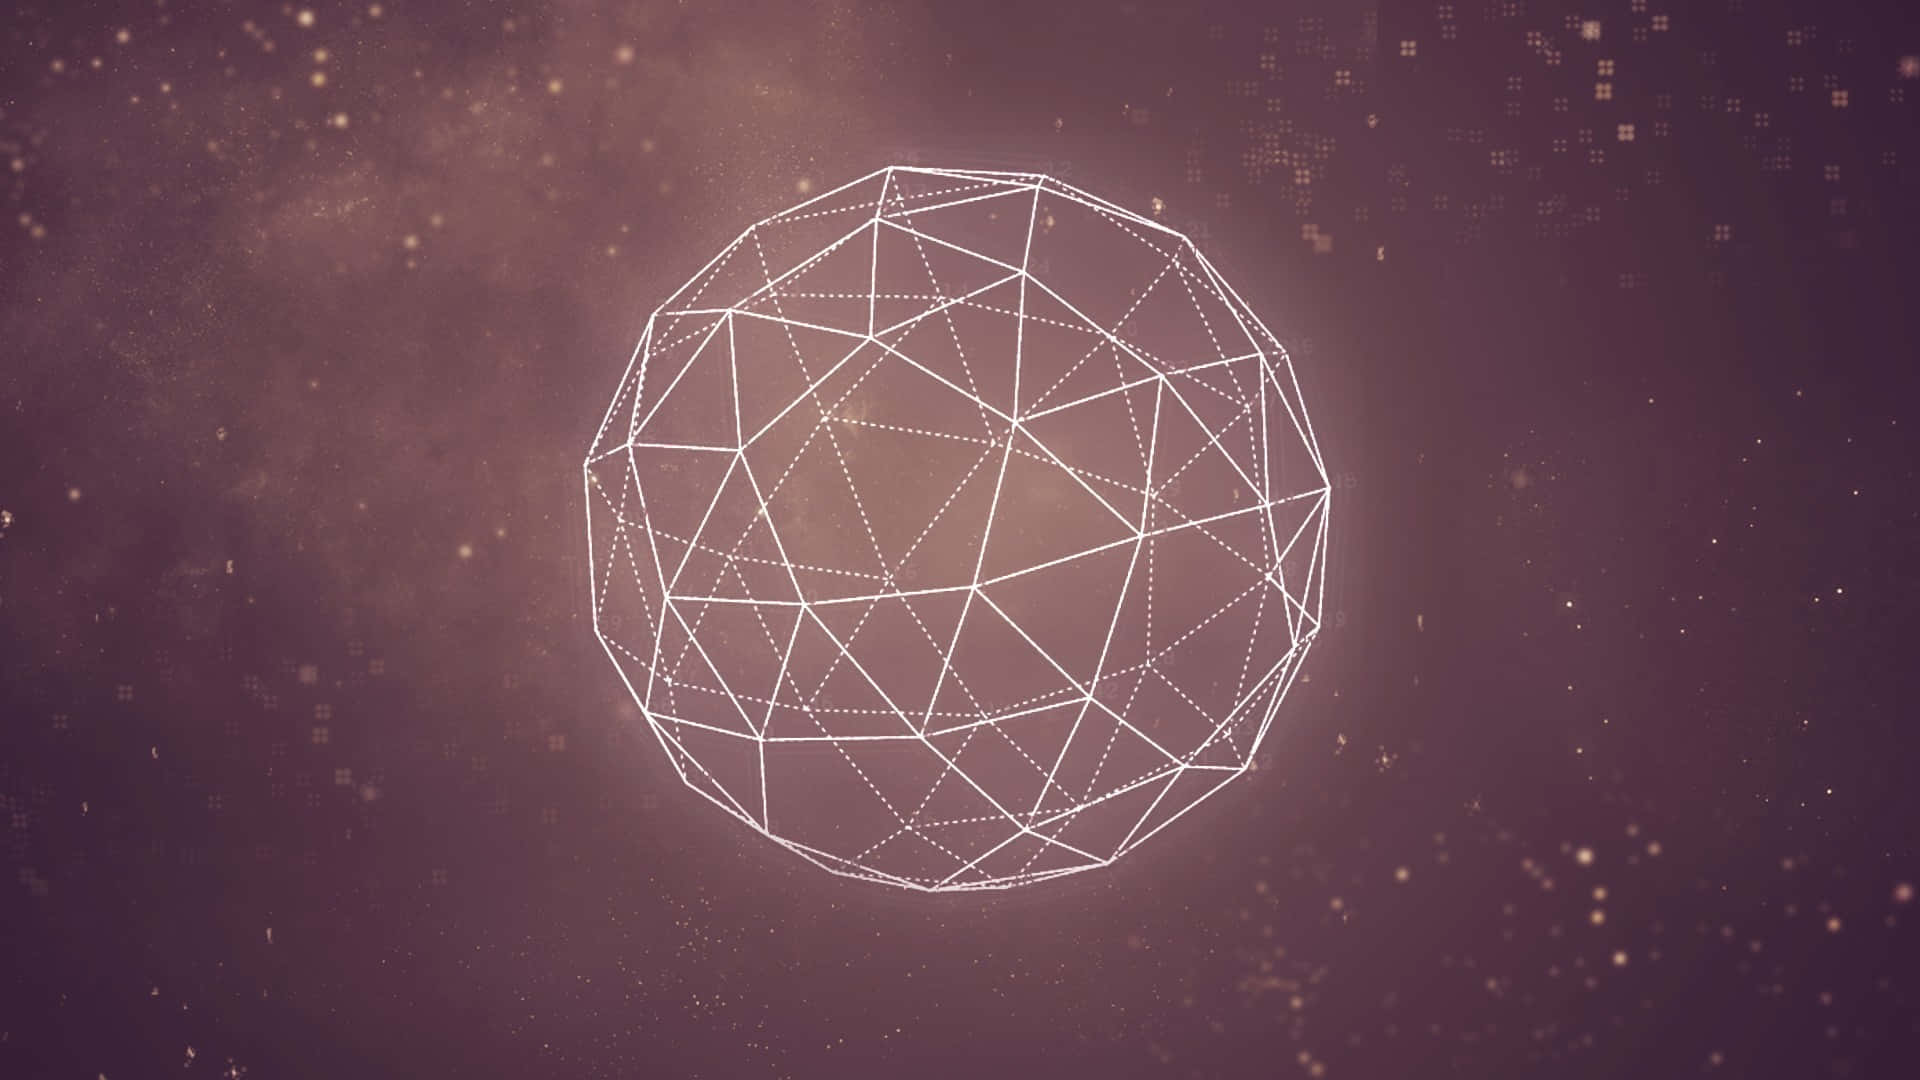 A White Egg With A Starry Background Wallpaper